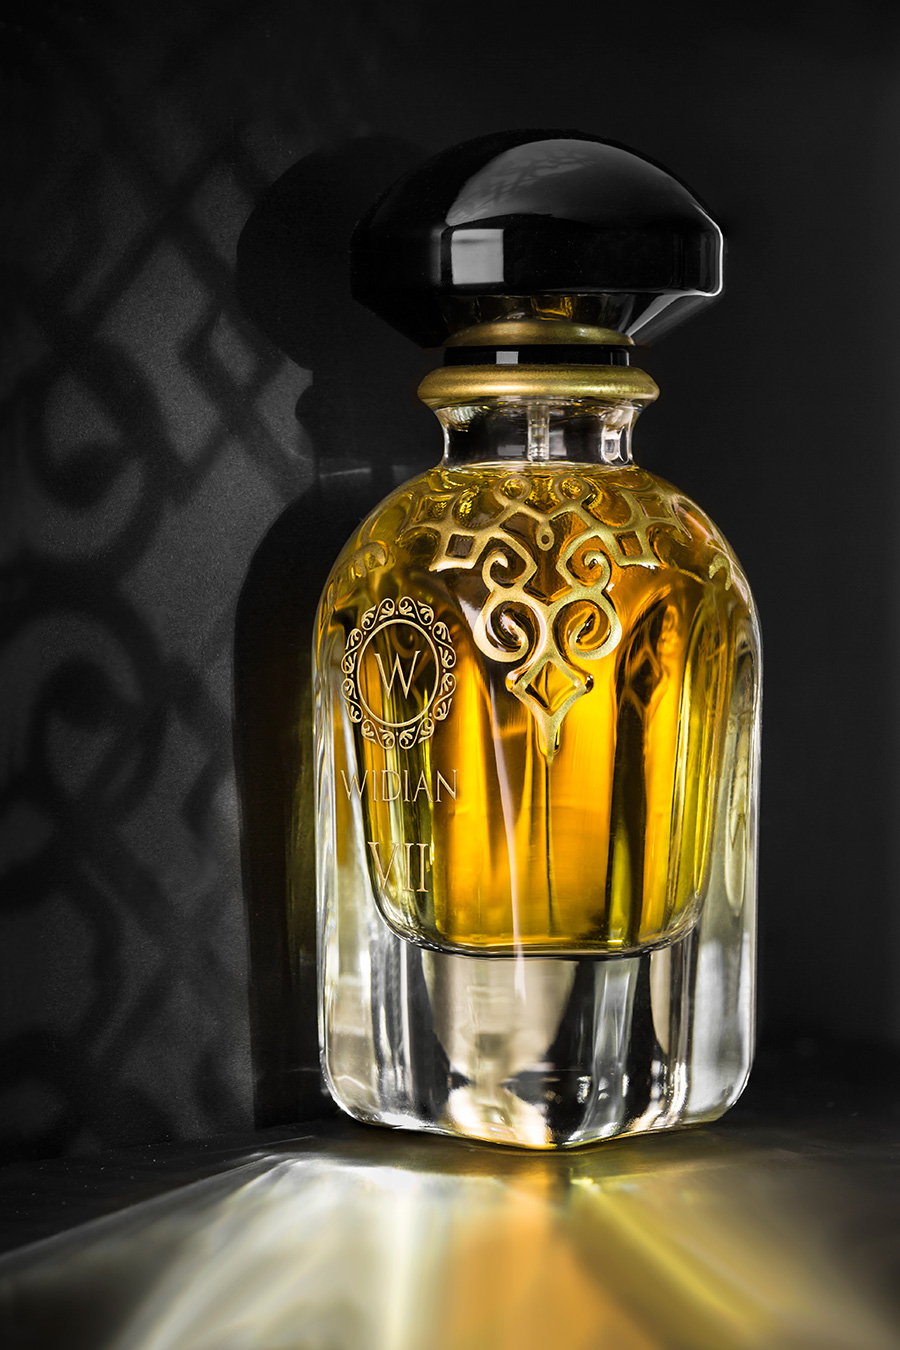 VII WIDIAN perfume - a fragrance for women and men 2014